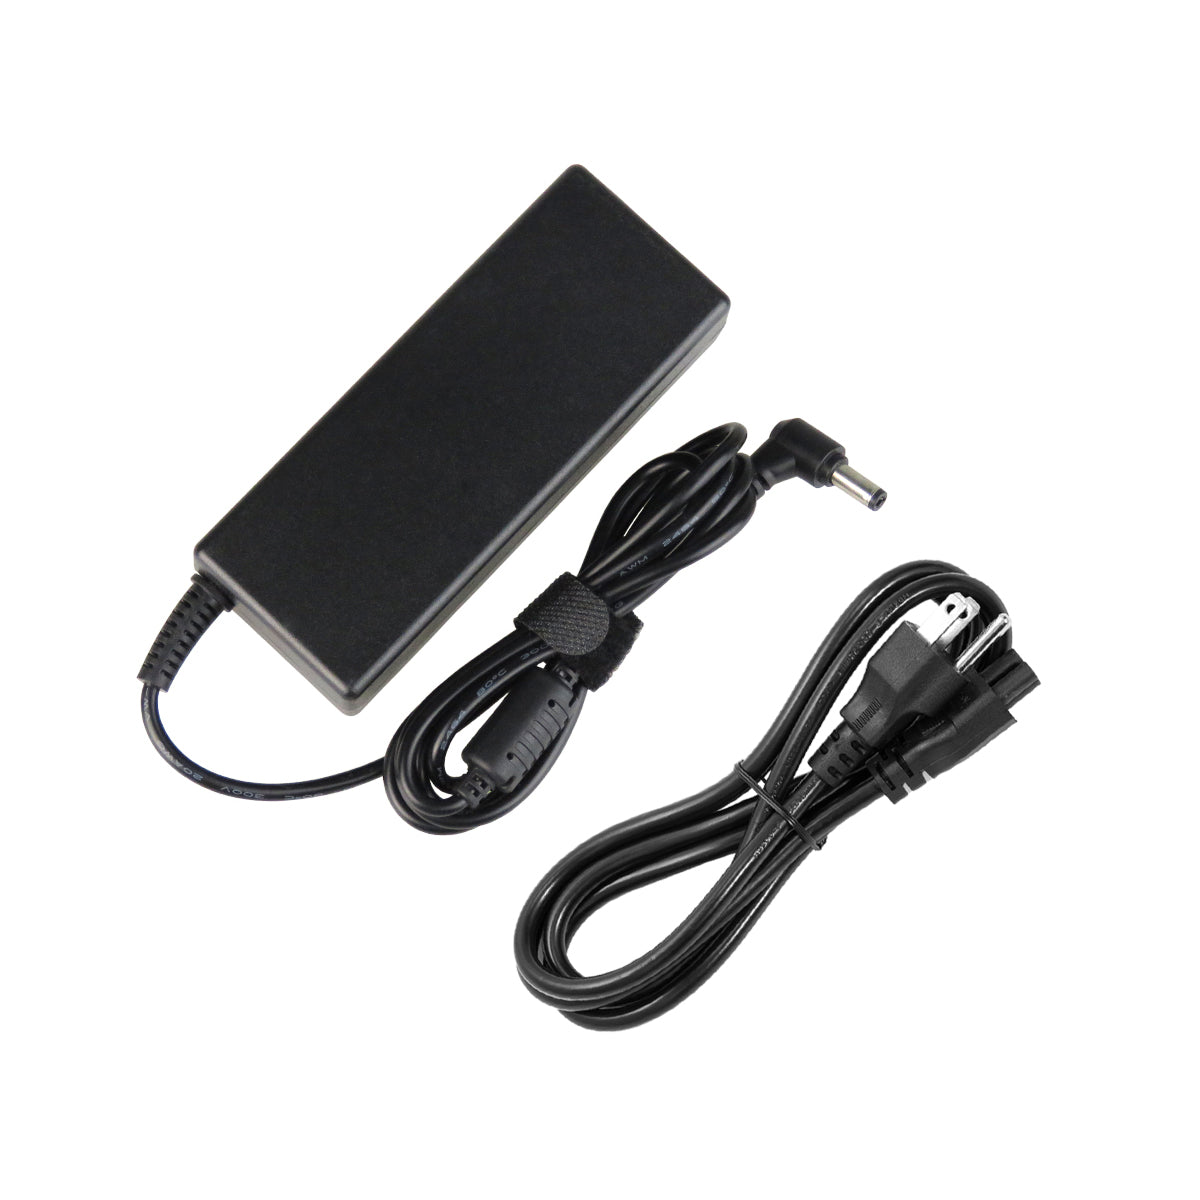 AC Adapter Charger for Toshiba Satellite s75-a7270 Notebook.